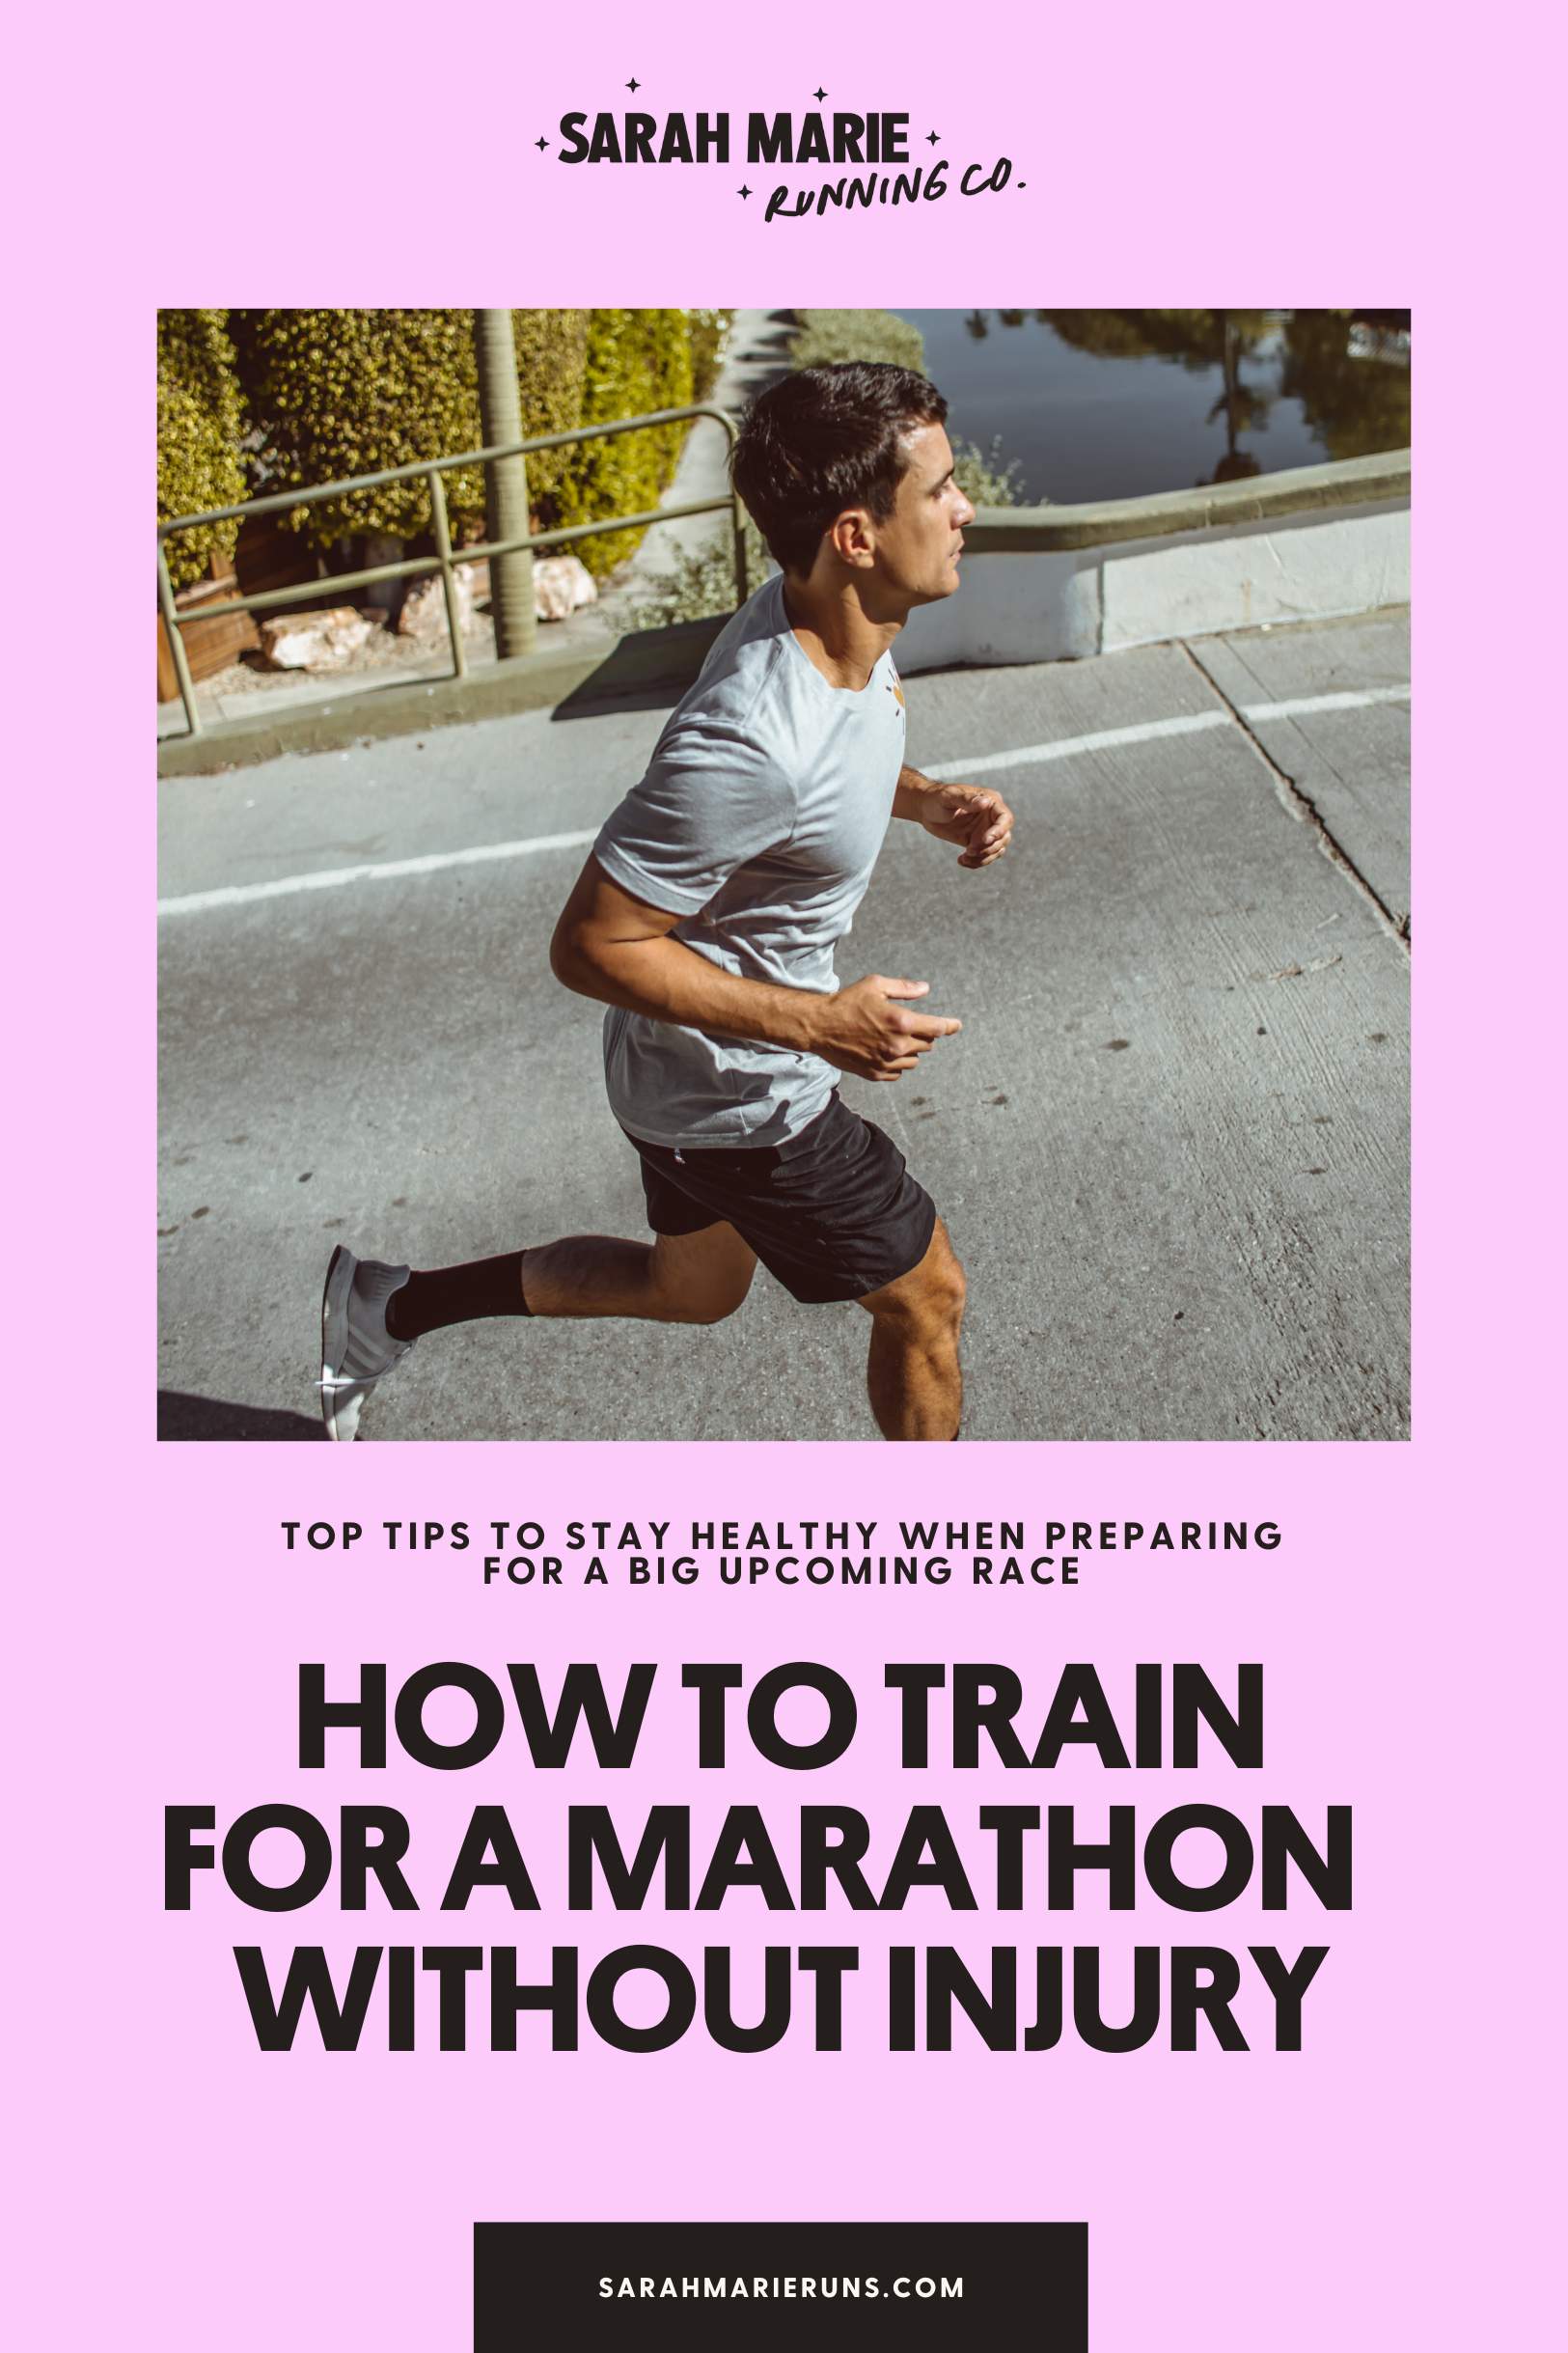 How to train for a marathon without getting injured - Running Blog Post by Sarah Marie Running Co.